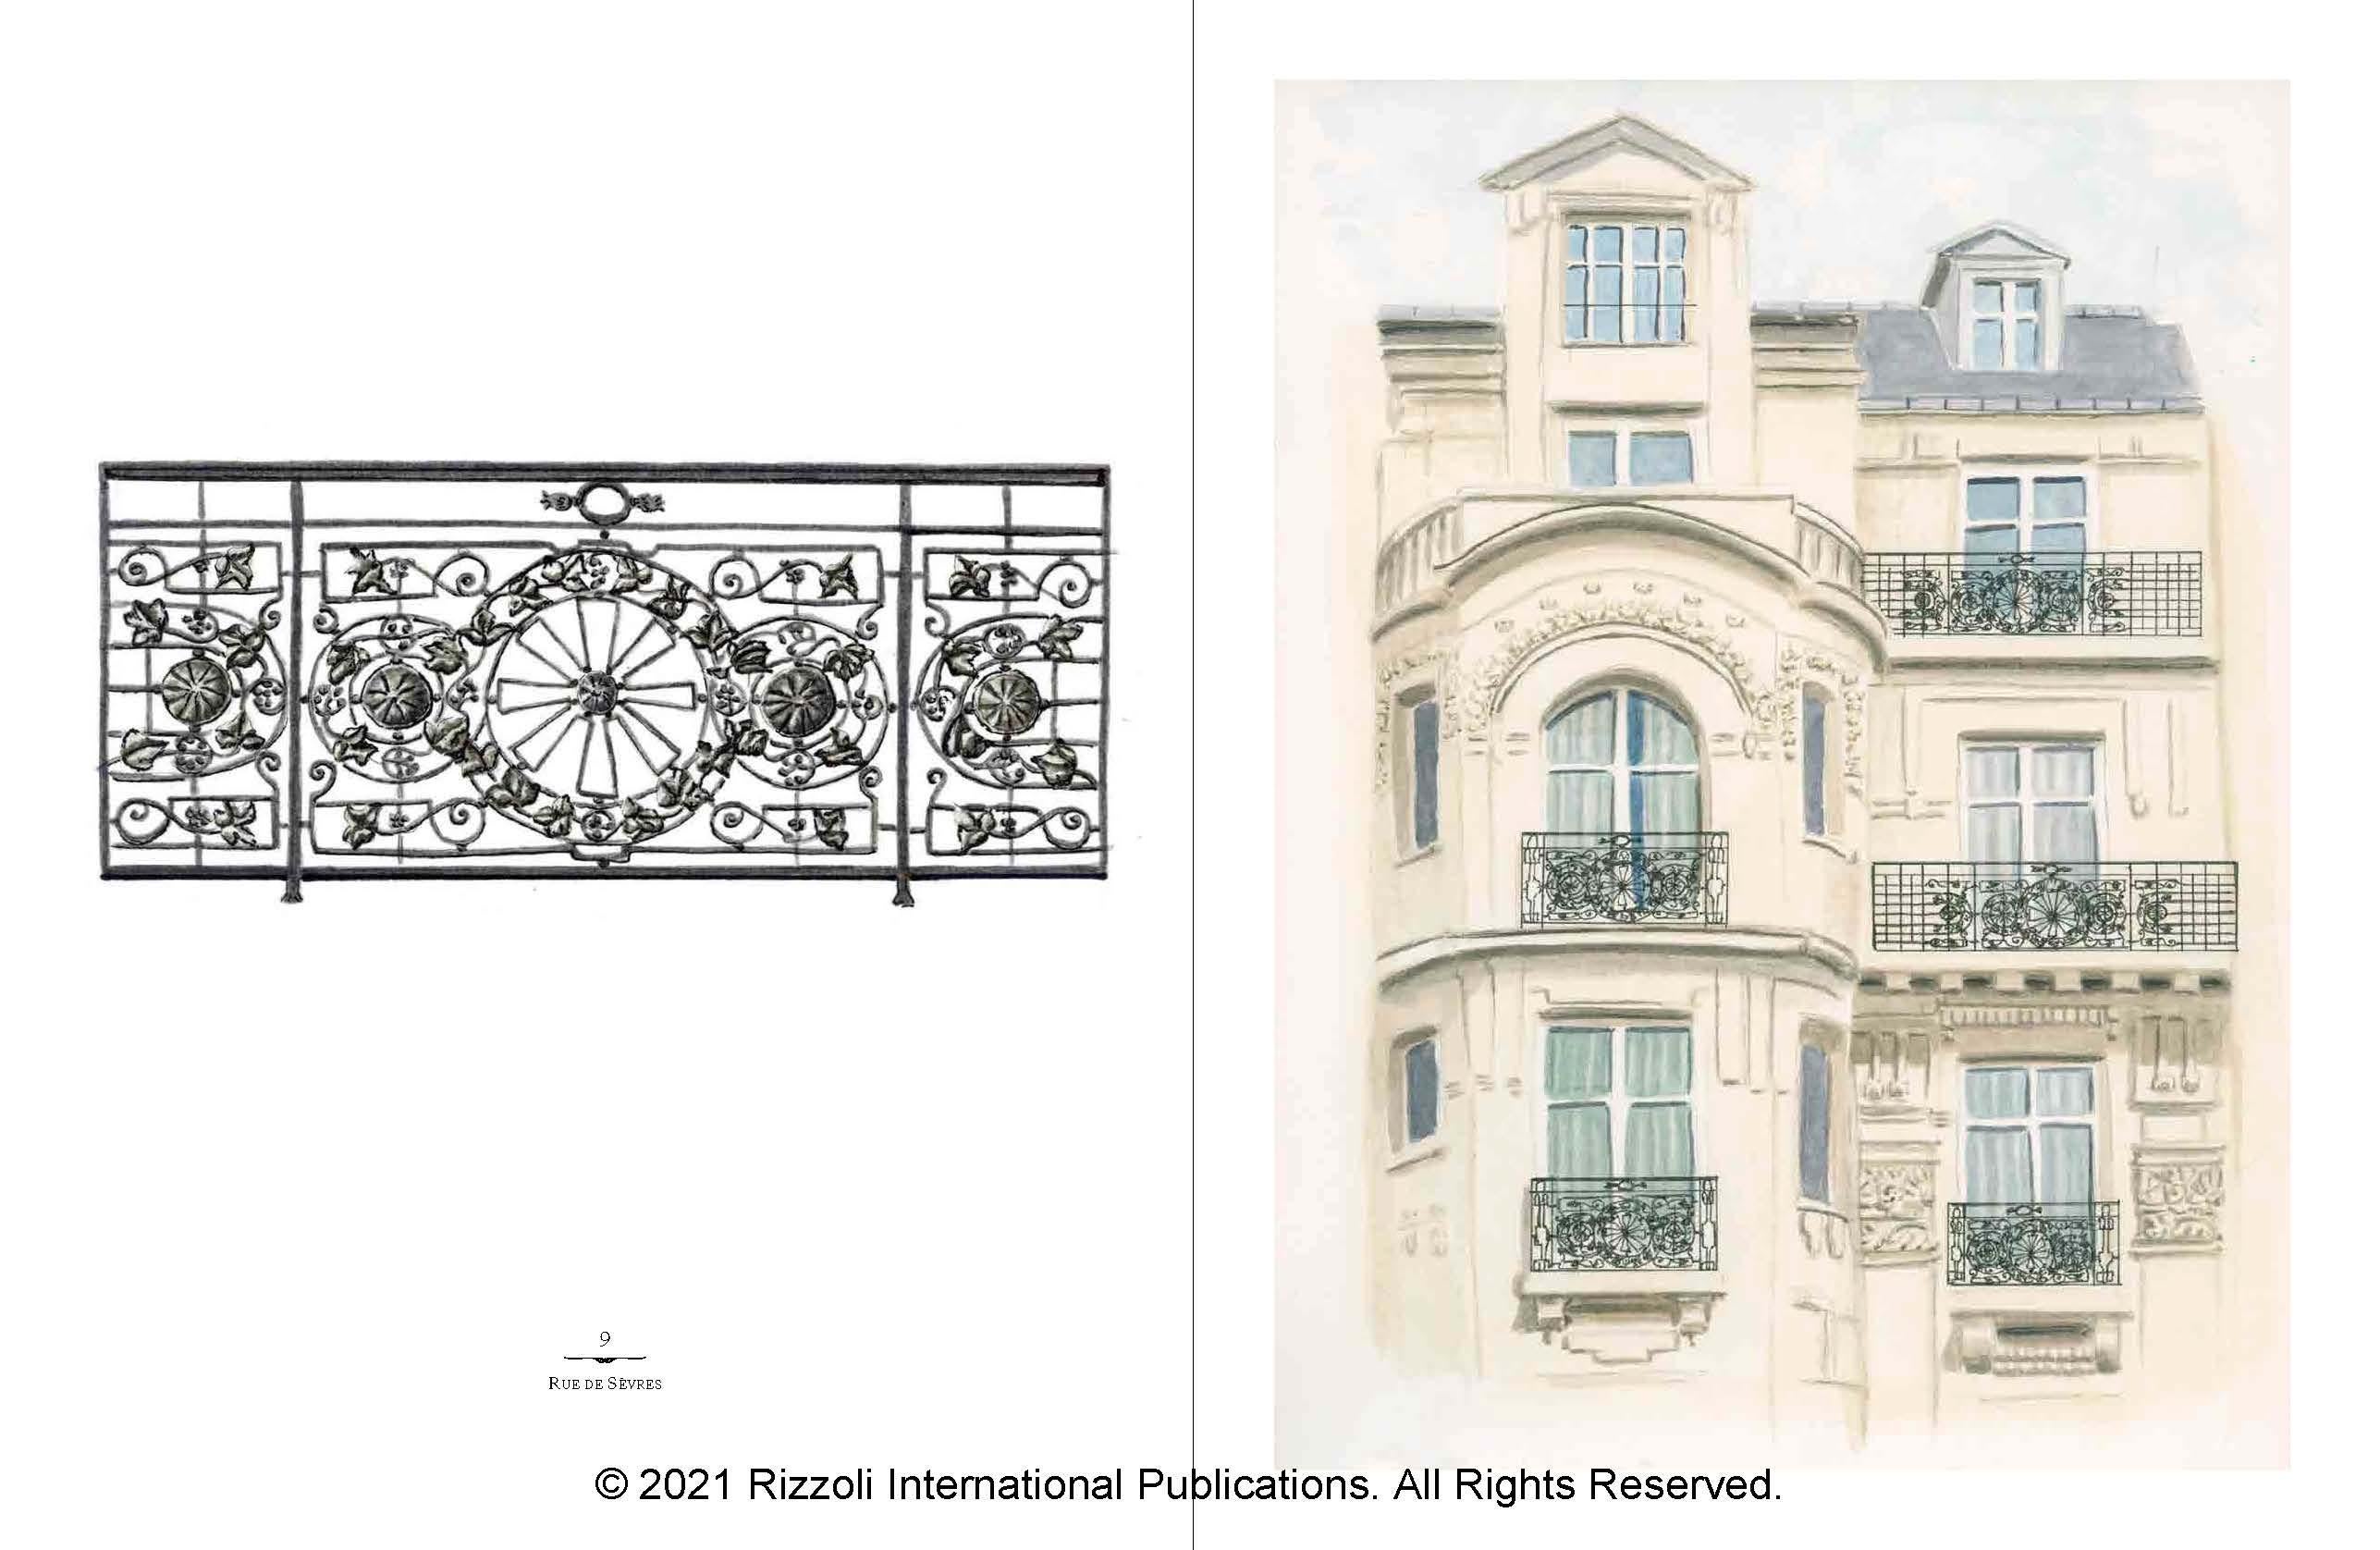 Lively watercolors and ink drawings of refined facades draw a compelling portrait of Paris, where each building is accompanied by its delightful ornamental details.

This elegant book invites readers to lift up their eyes while strolling